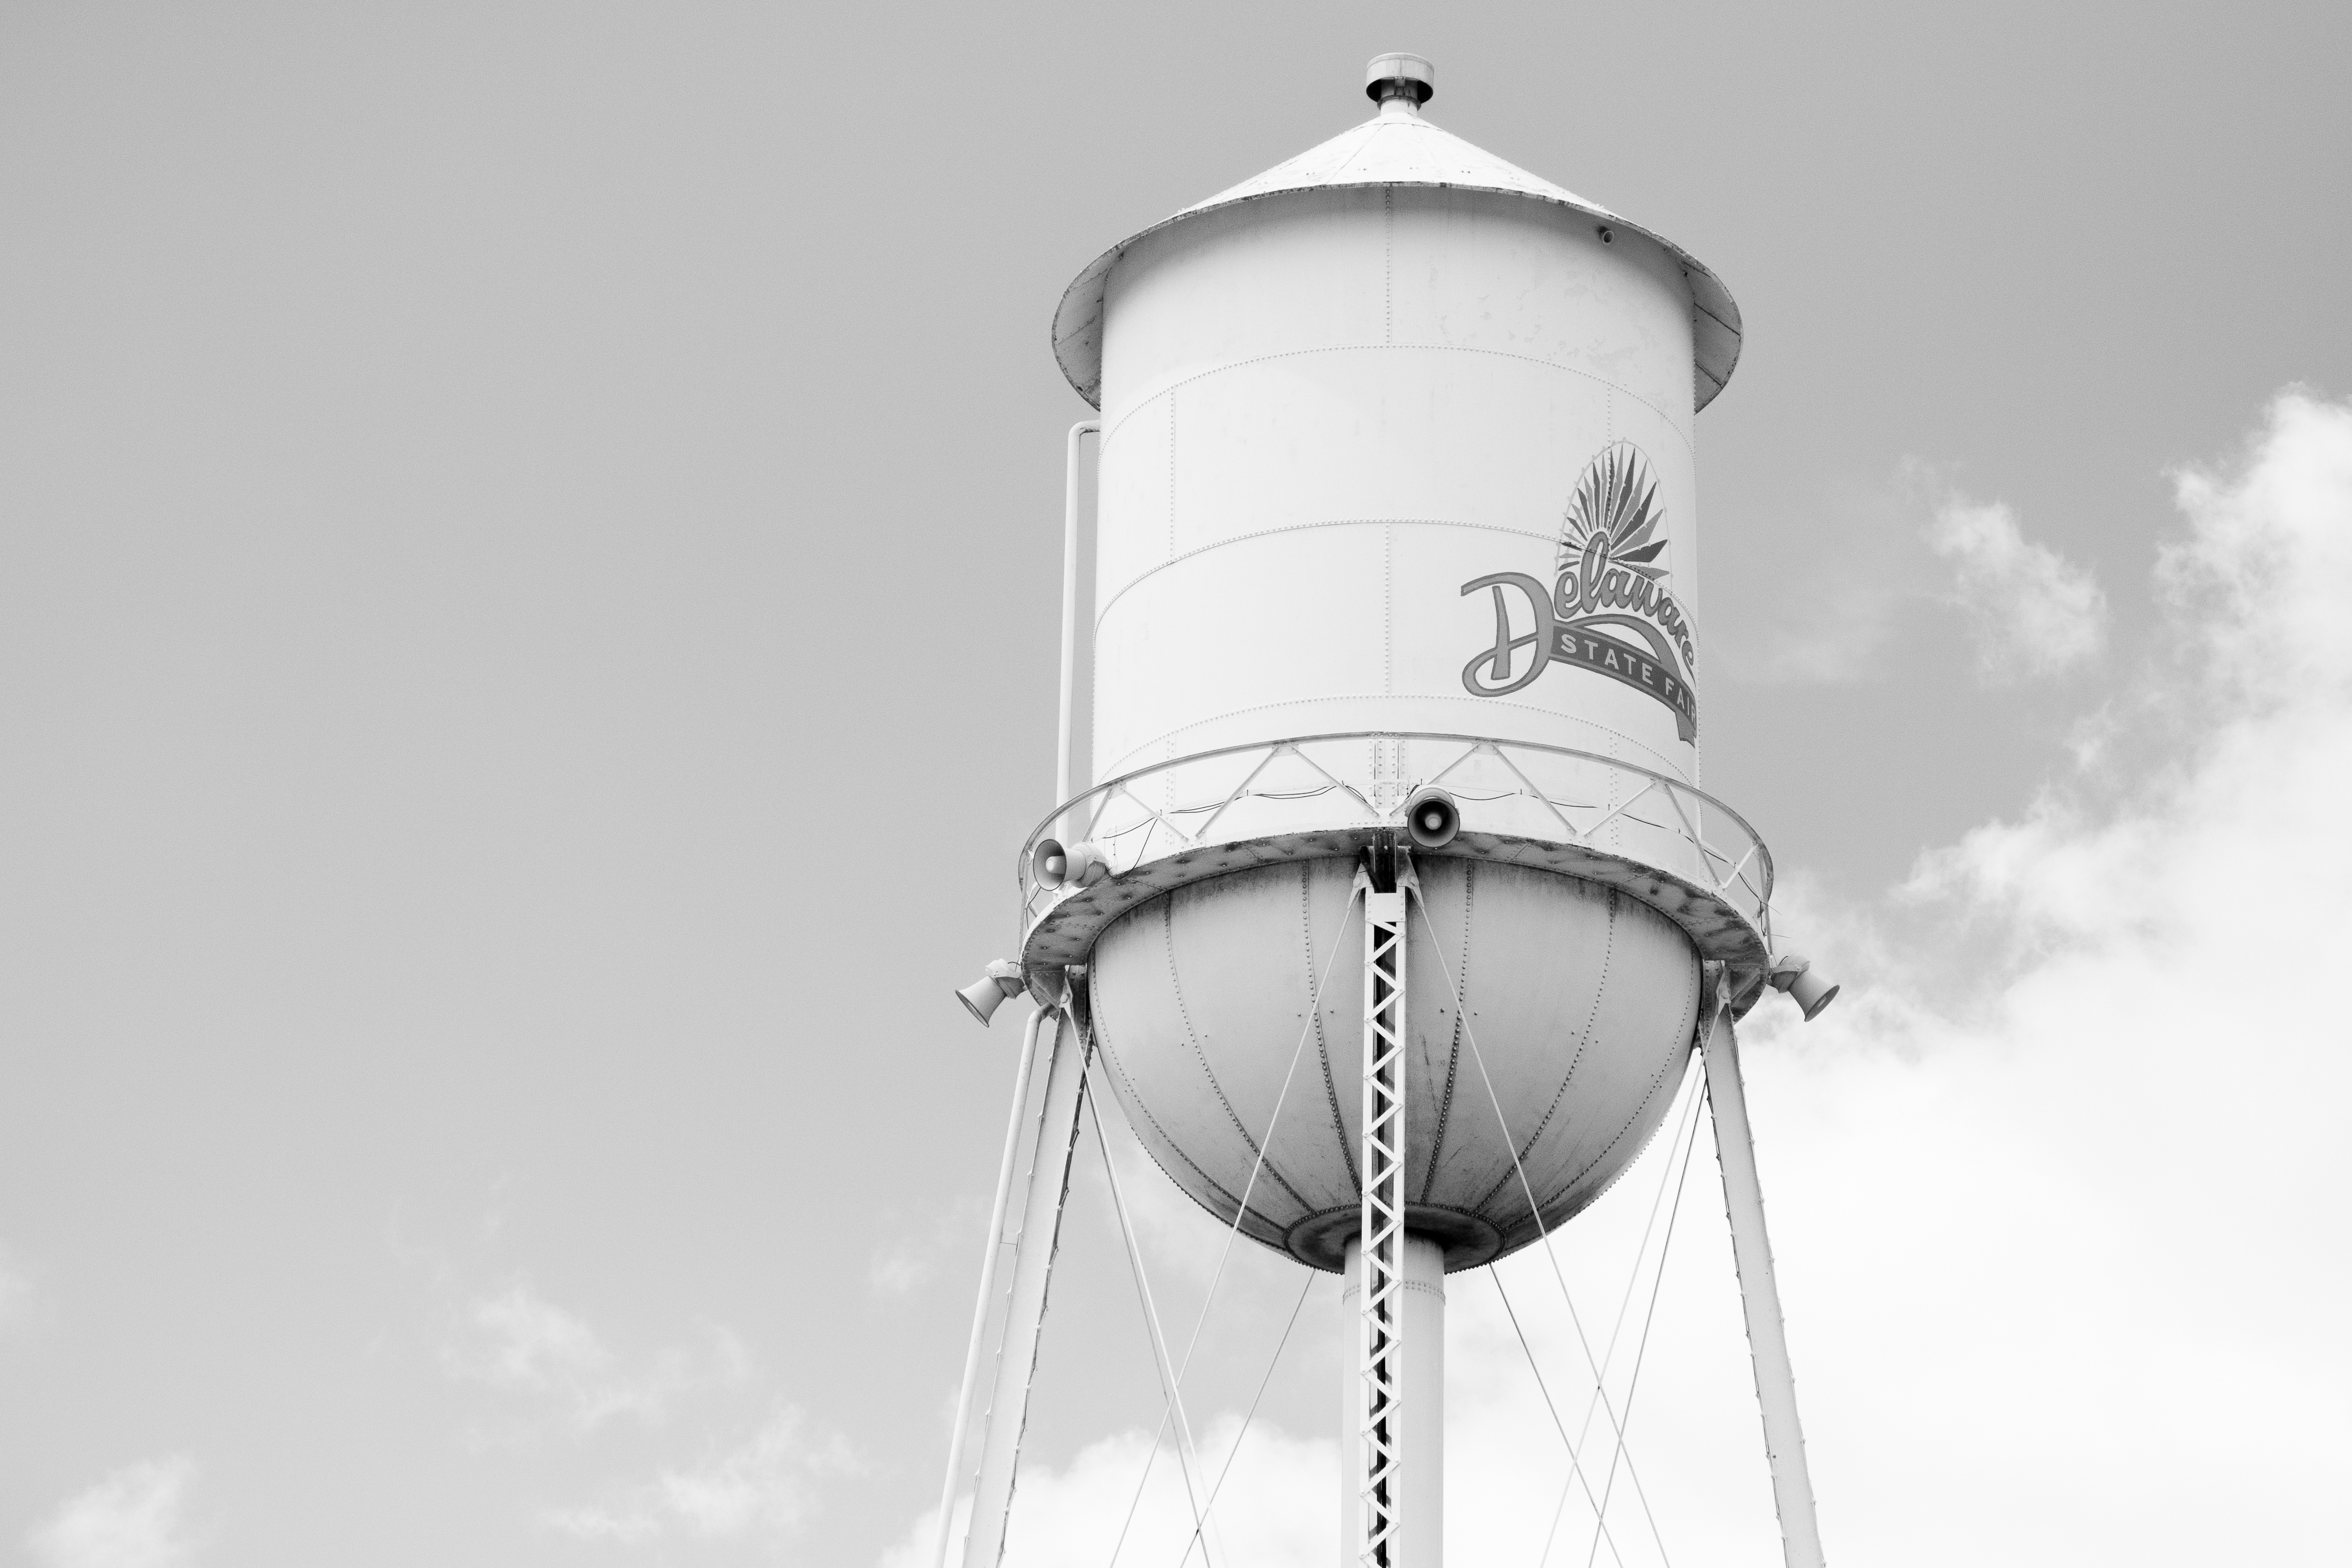 A black and white photo of the watertower in Harrington with the Delaware State Fair logo